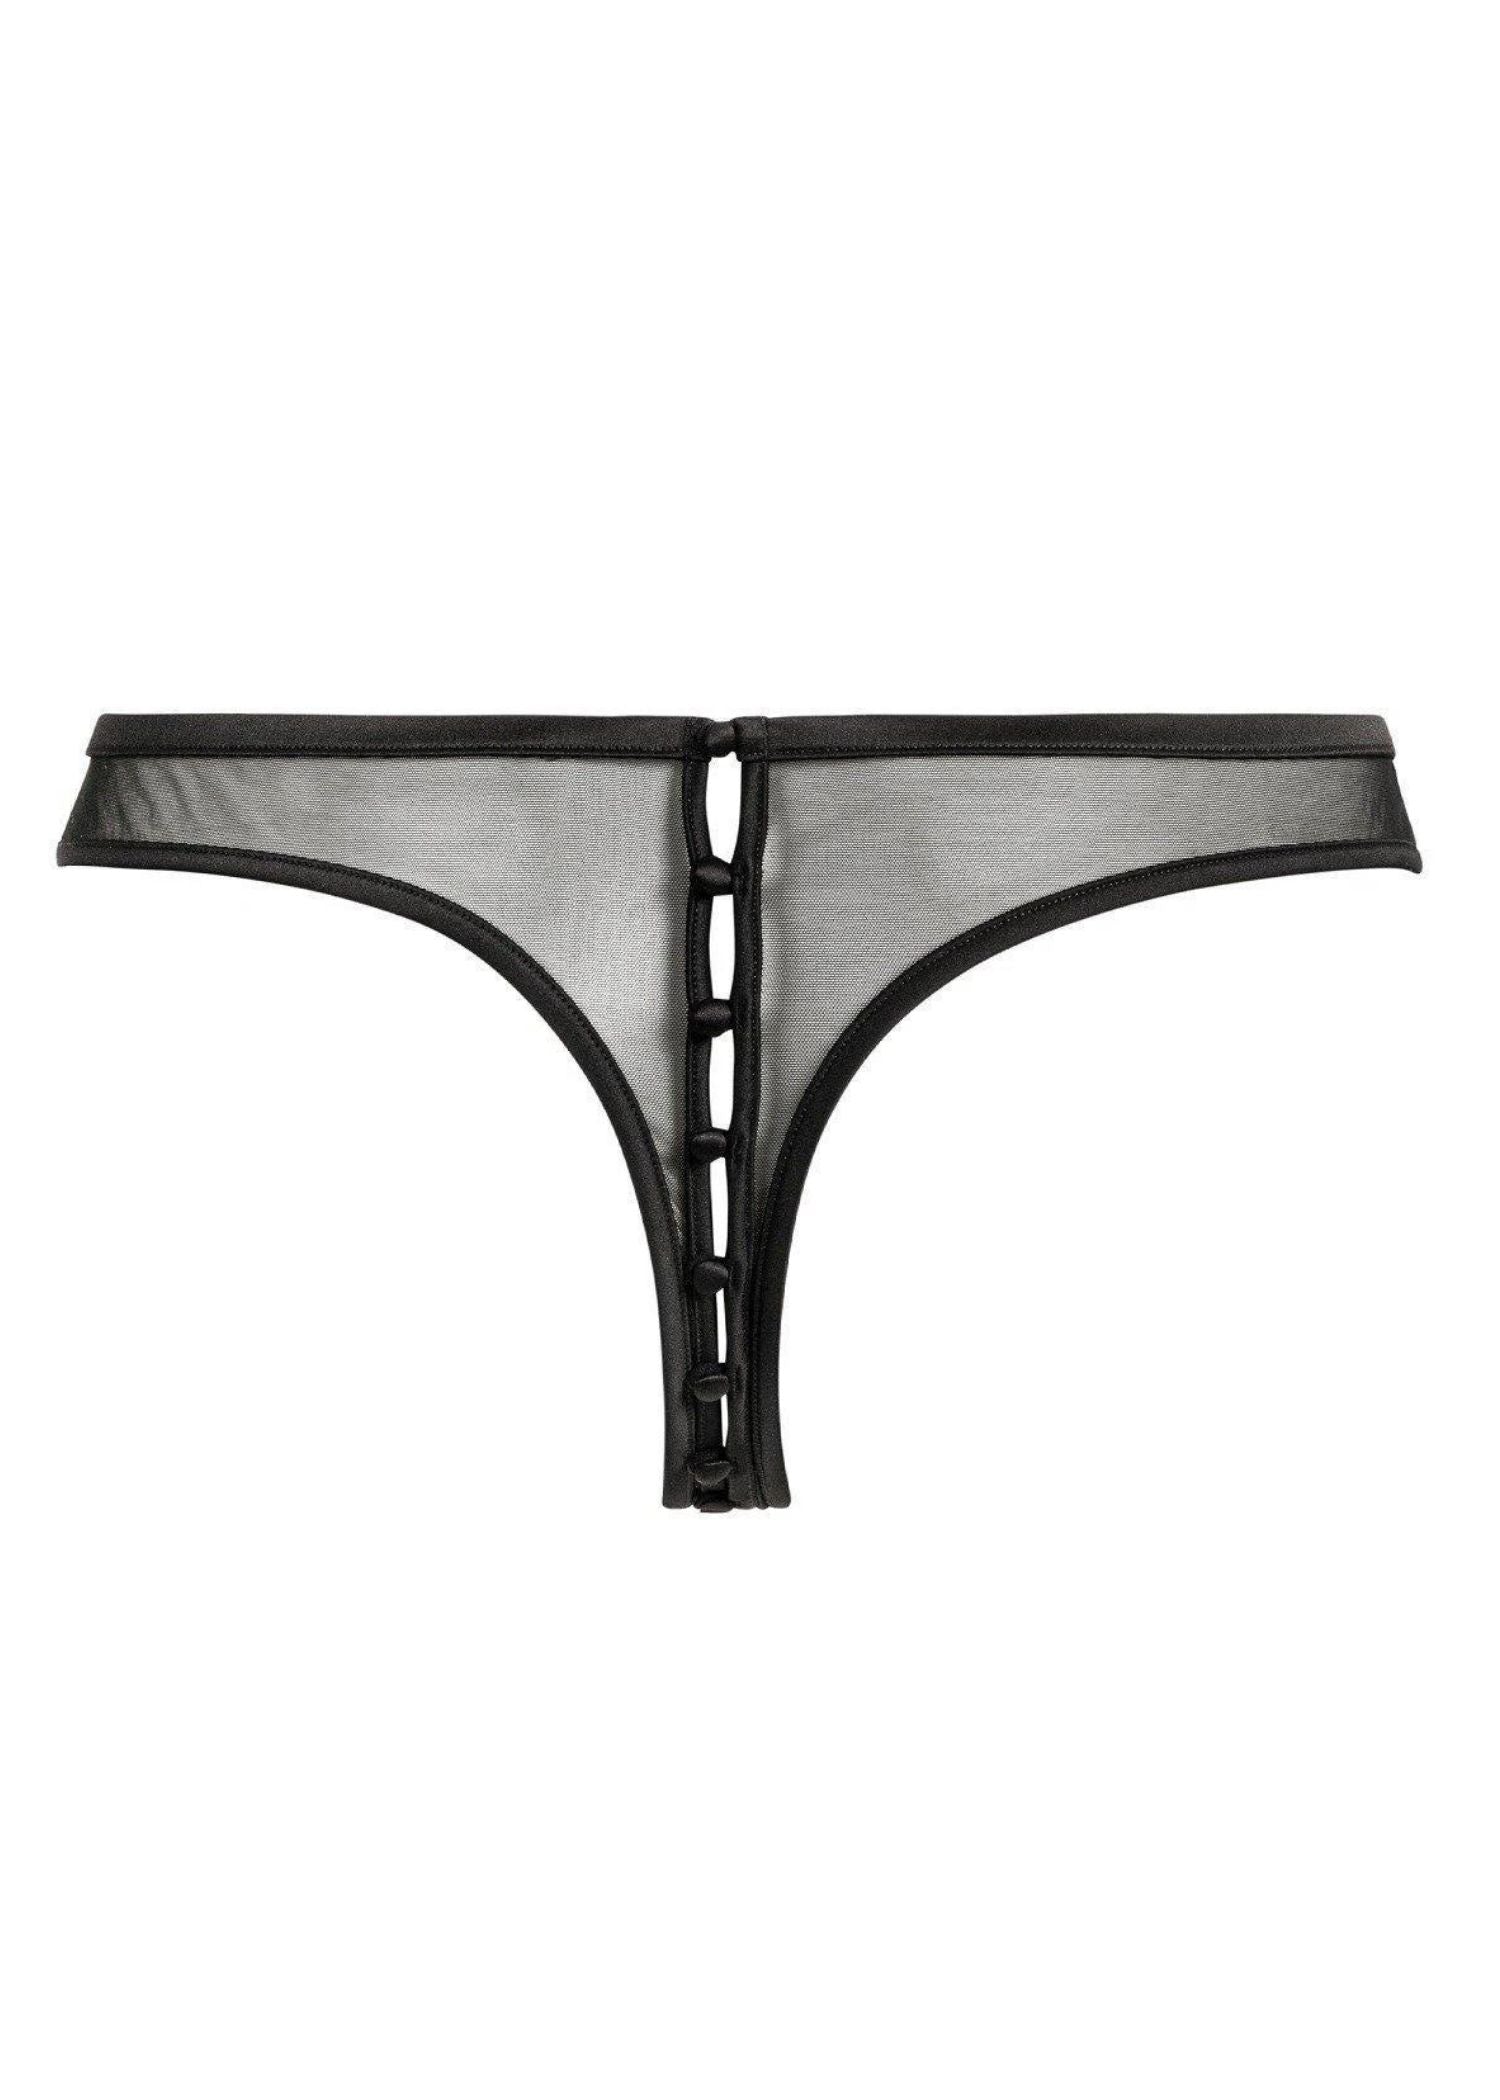 Atelier Amour Soft Insomnia Open Thong - Black Mesh Openable Thong - Avec Amour Sexy Lingerie